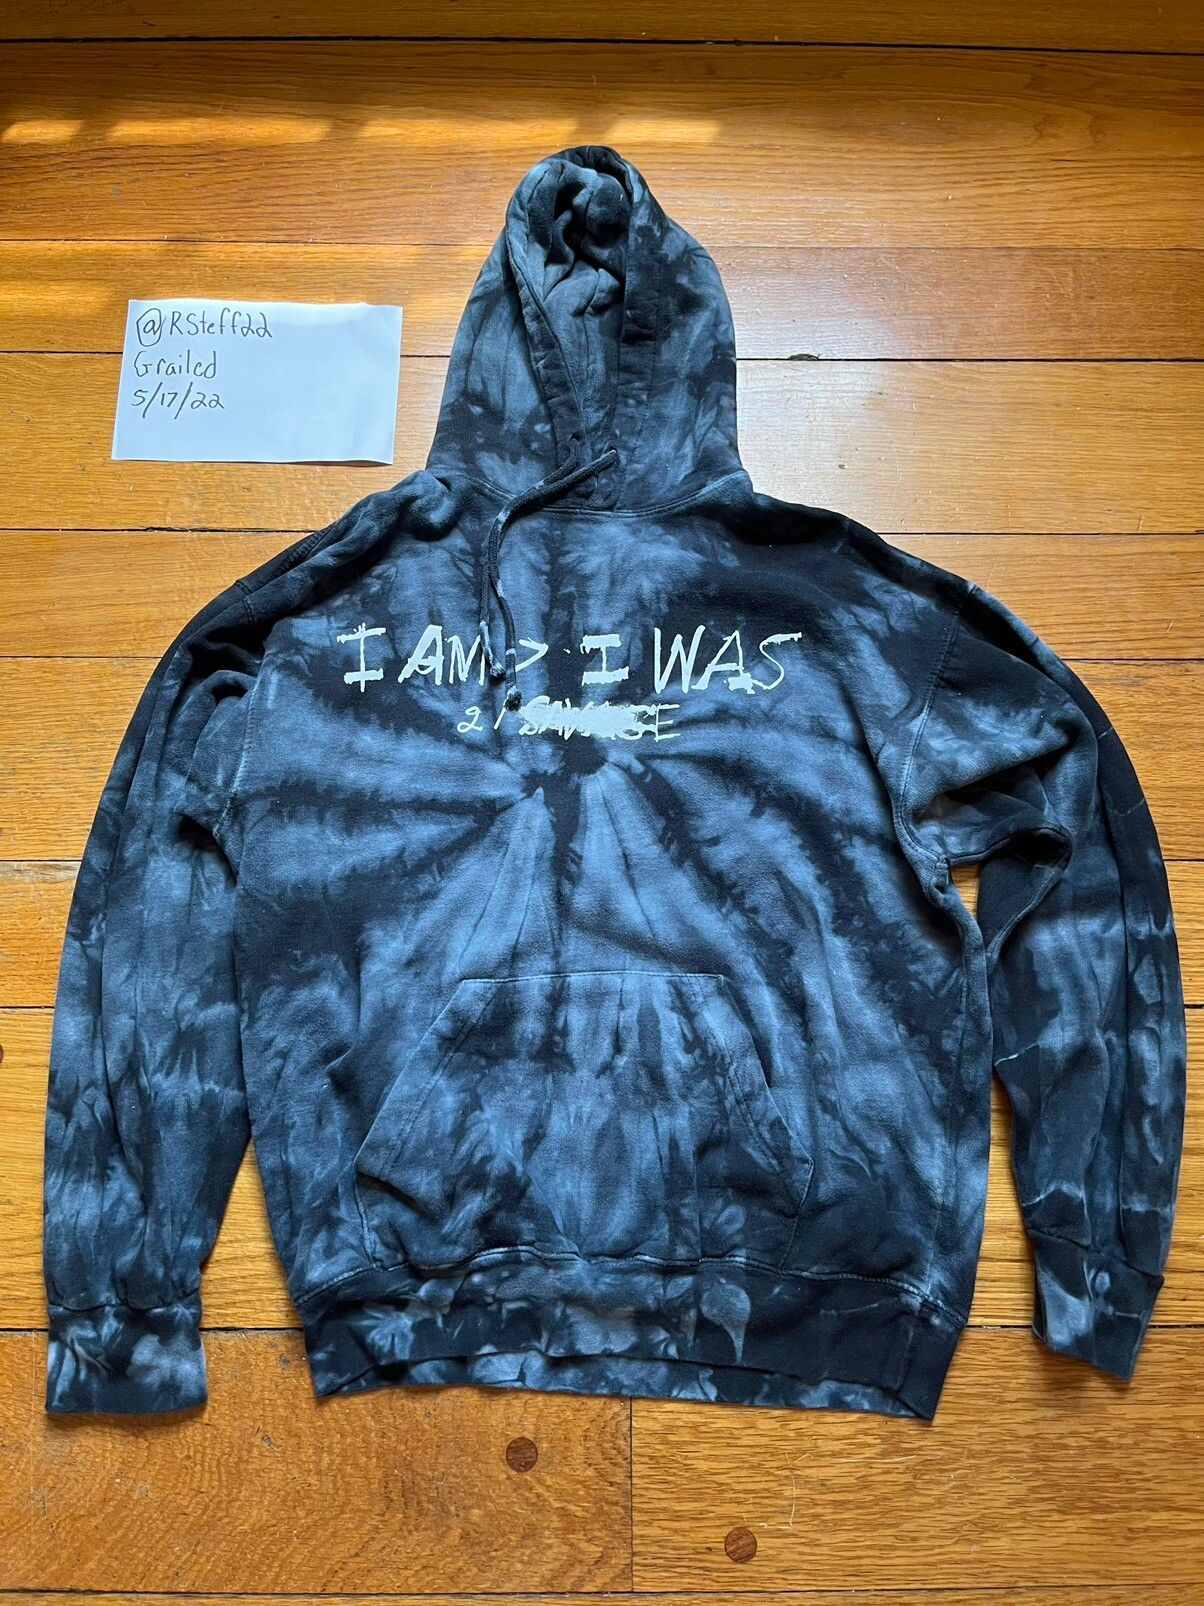 Streetwear 21 SAVAGE I AM> I WAS CONCERT MERCH Size US M / EU 48-50 / 2 - 1 Preview